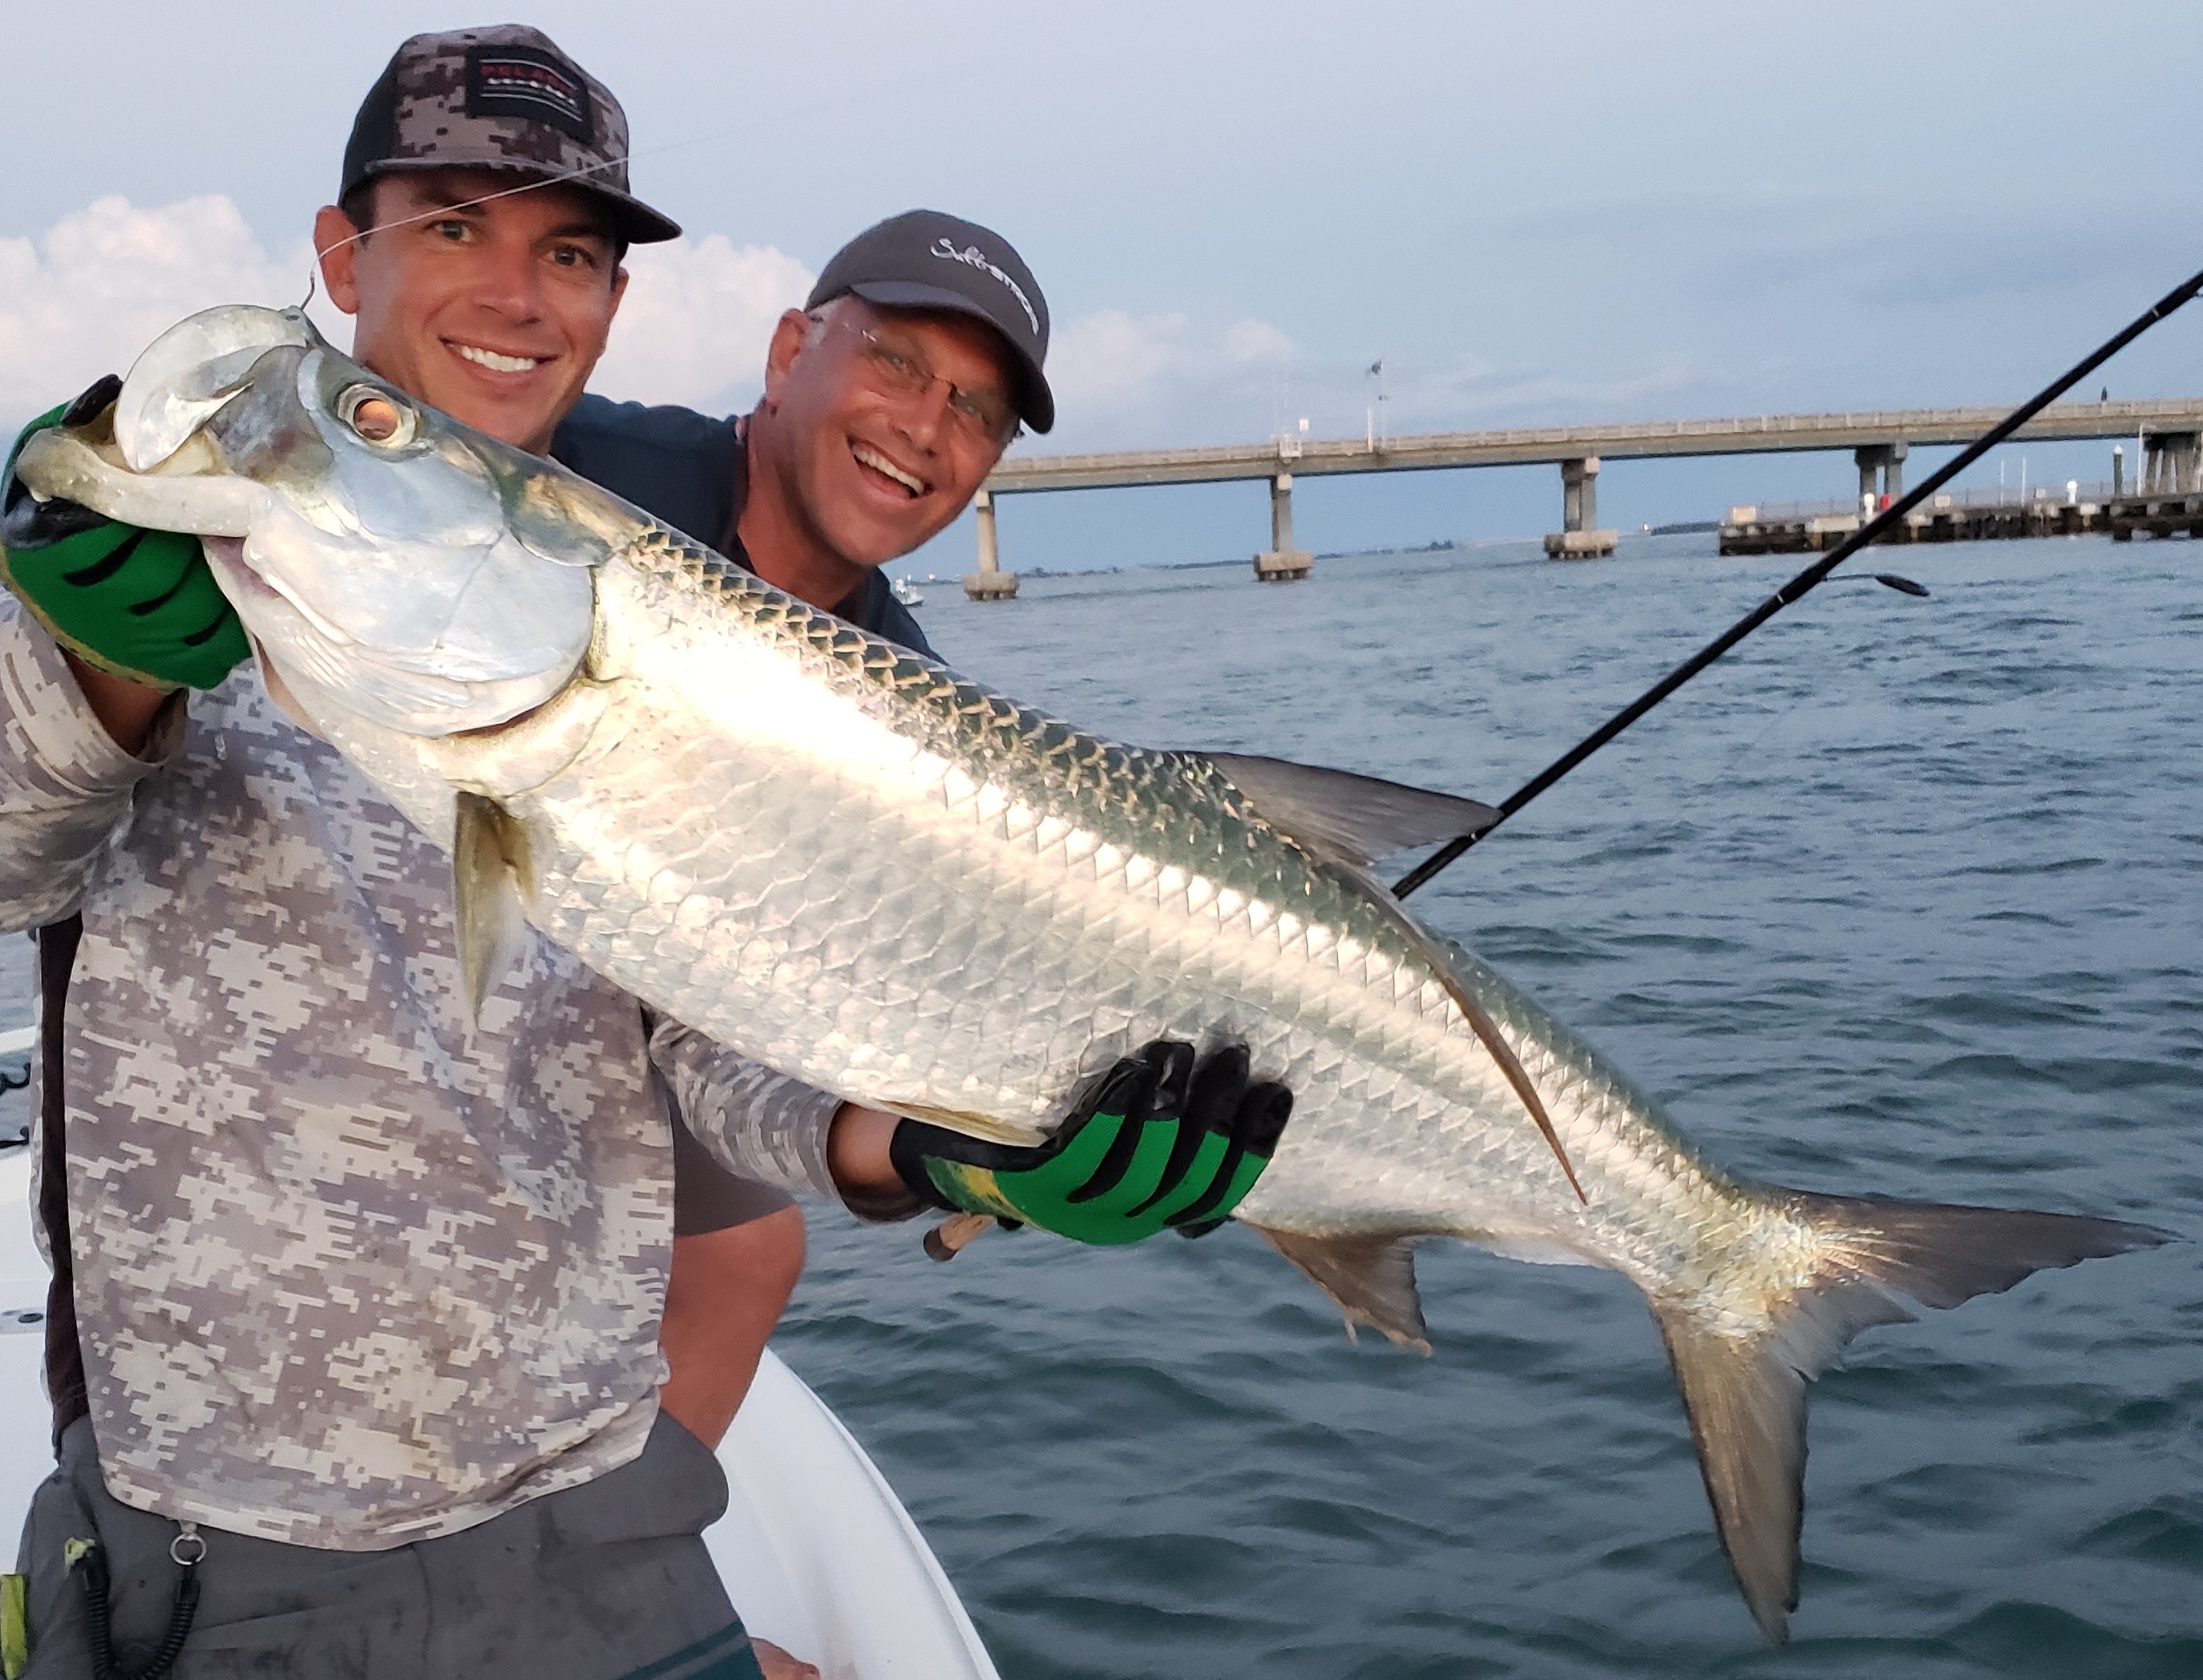 This Lure Retrieve Works Extremely Well For Tarpon [Fishing Report